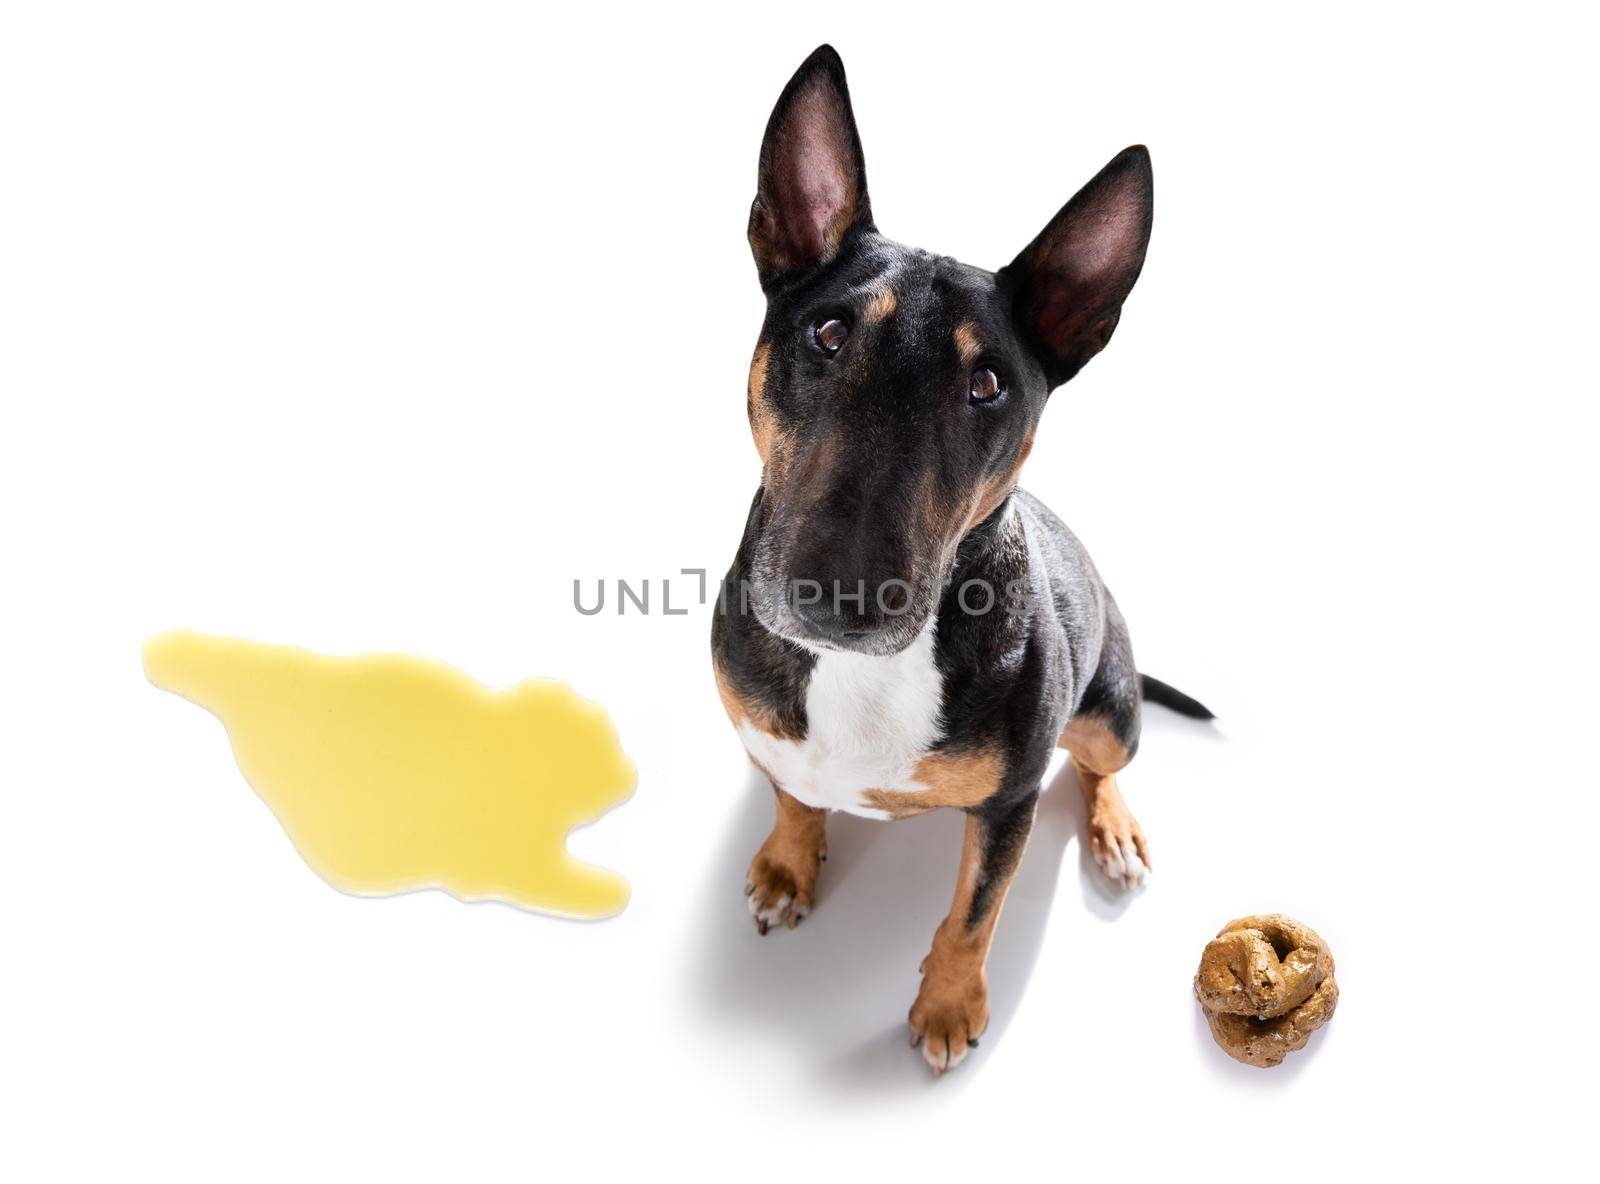 dog being punished for urinate or pee  at home by his owner, isolated on white background